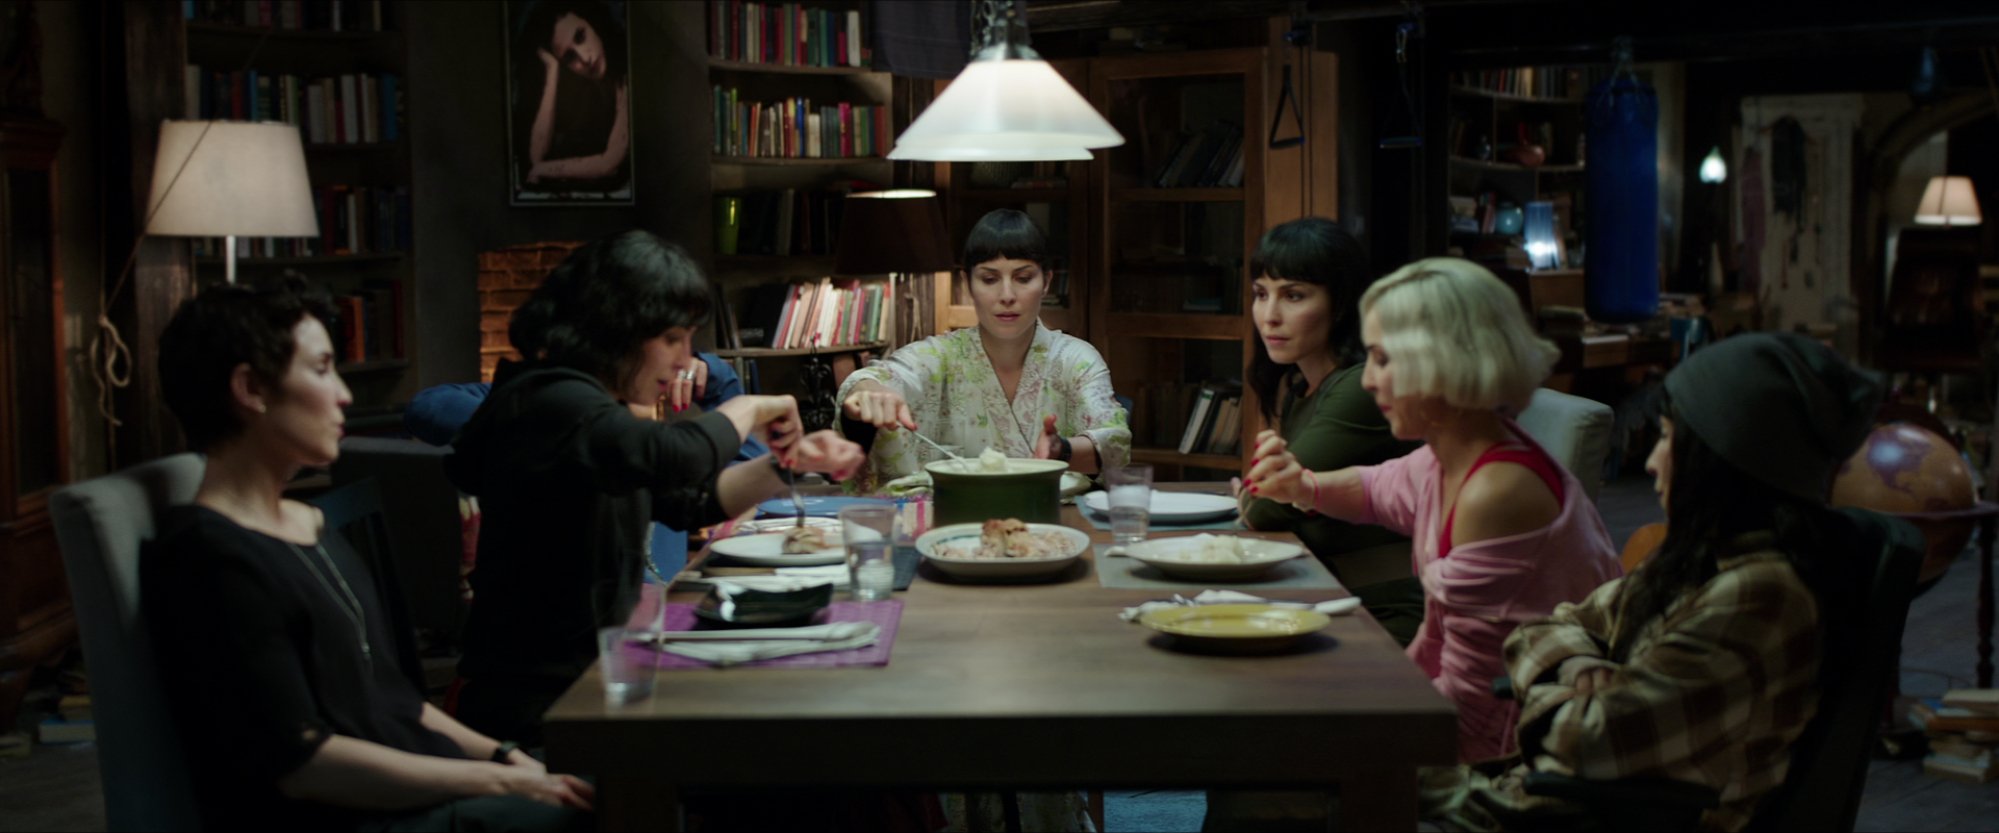 Six identical women sit around a dinner table.